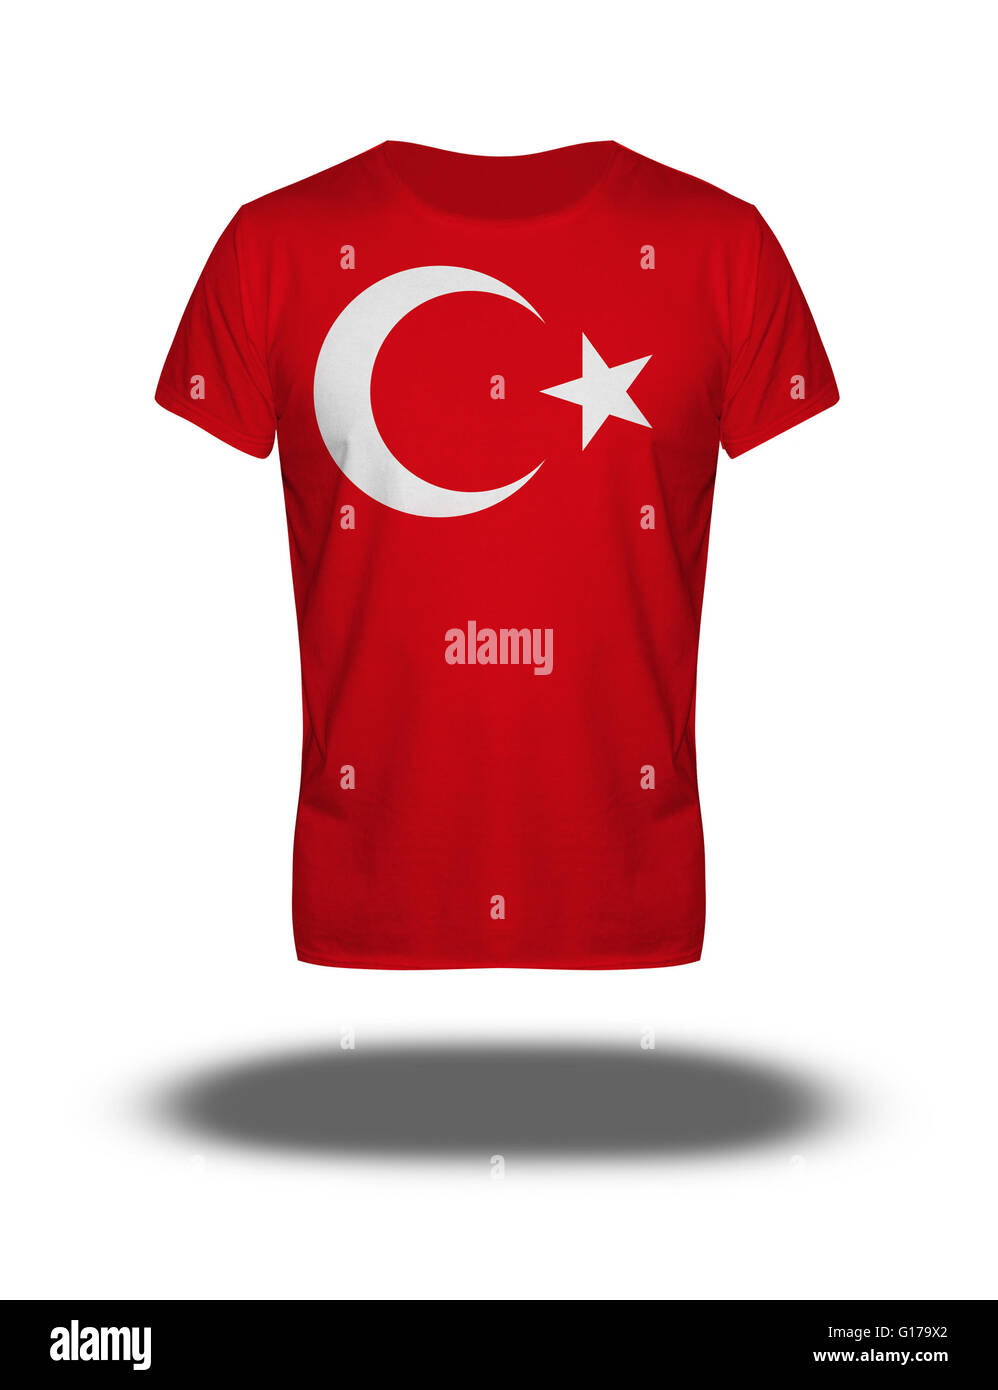 Turkey flag t-shirt on white background with shadow Stock Photo